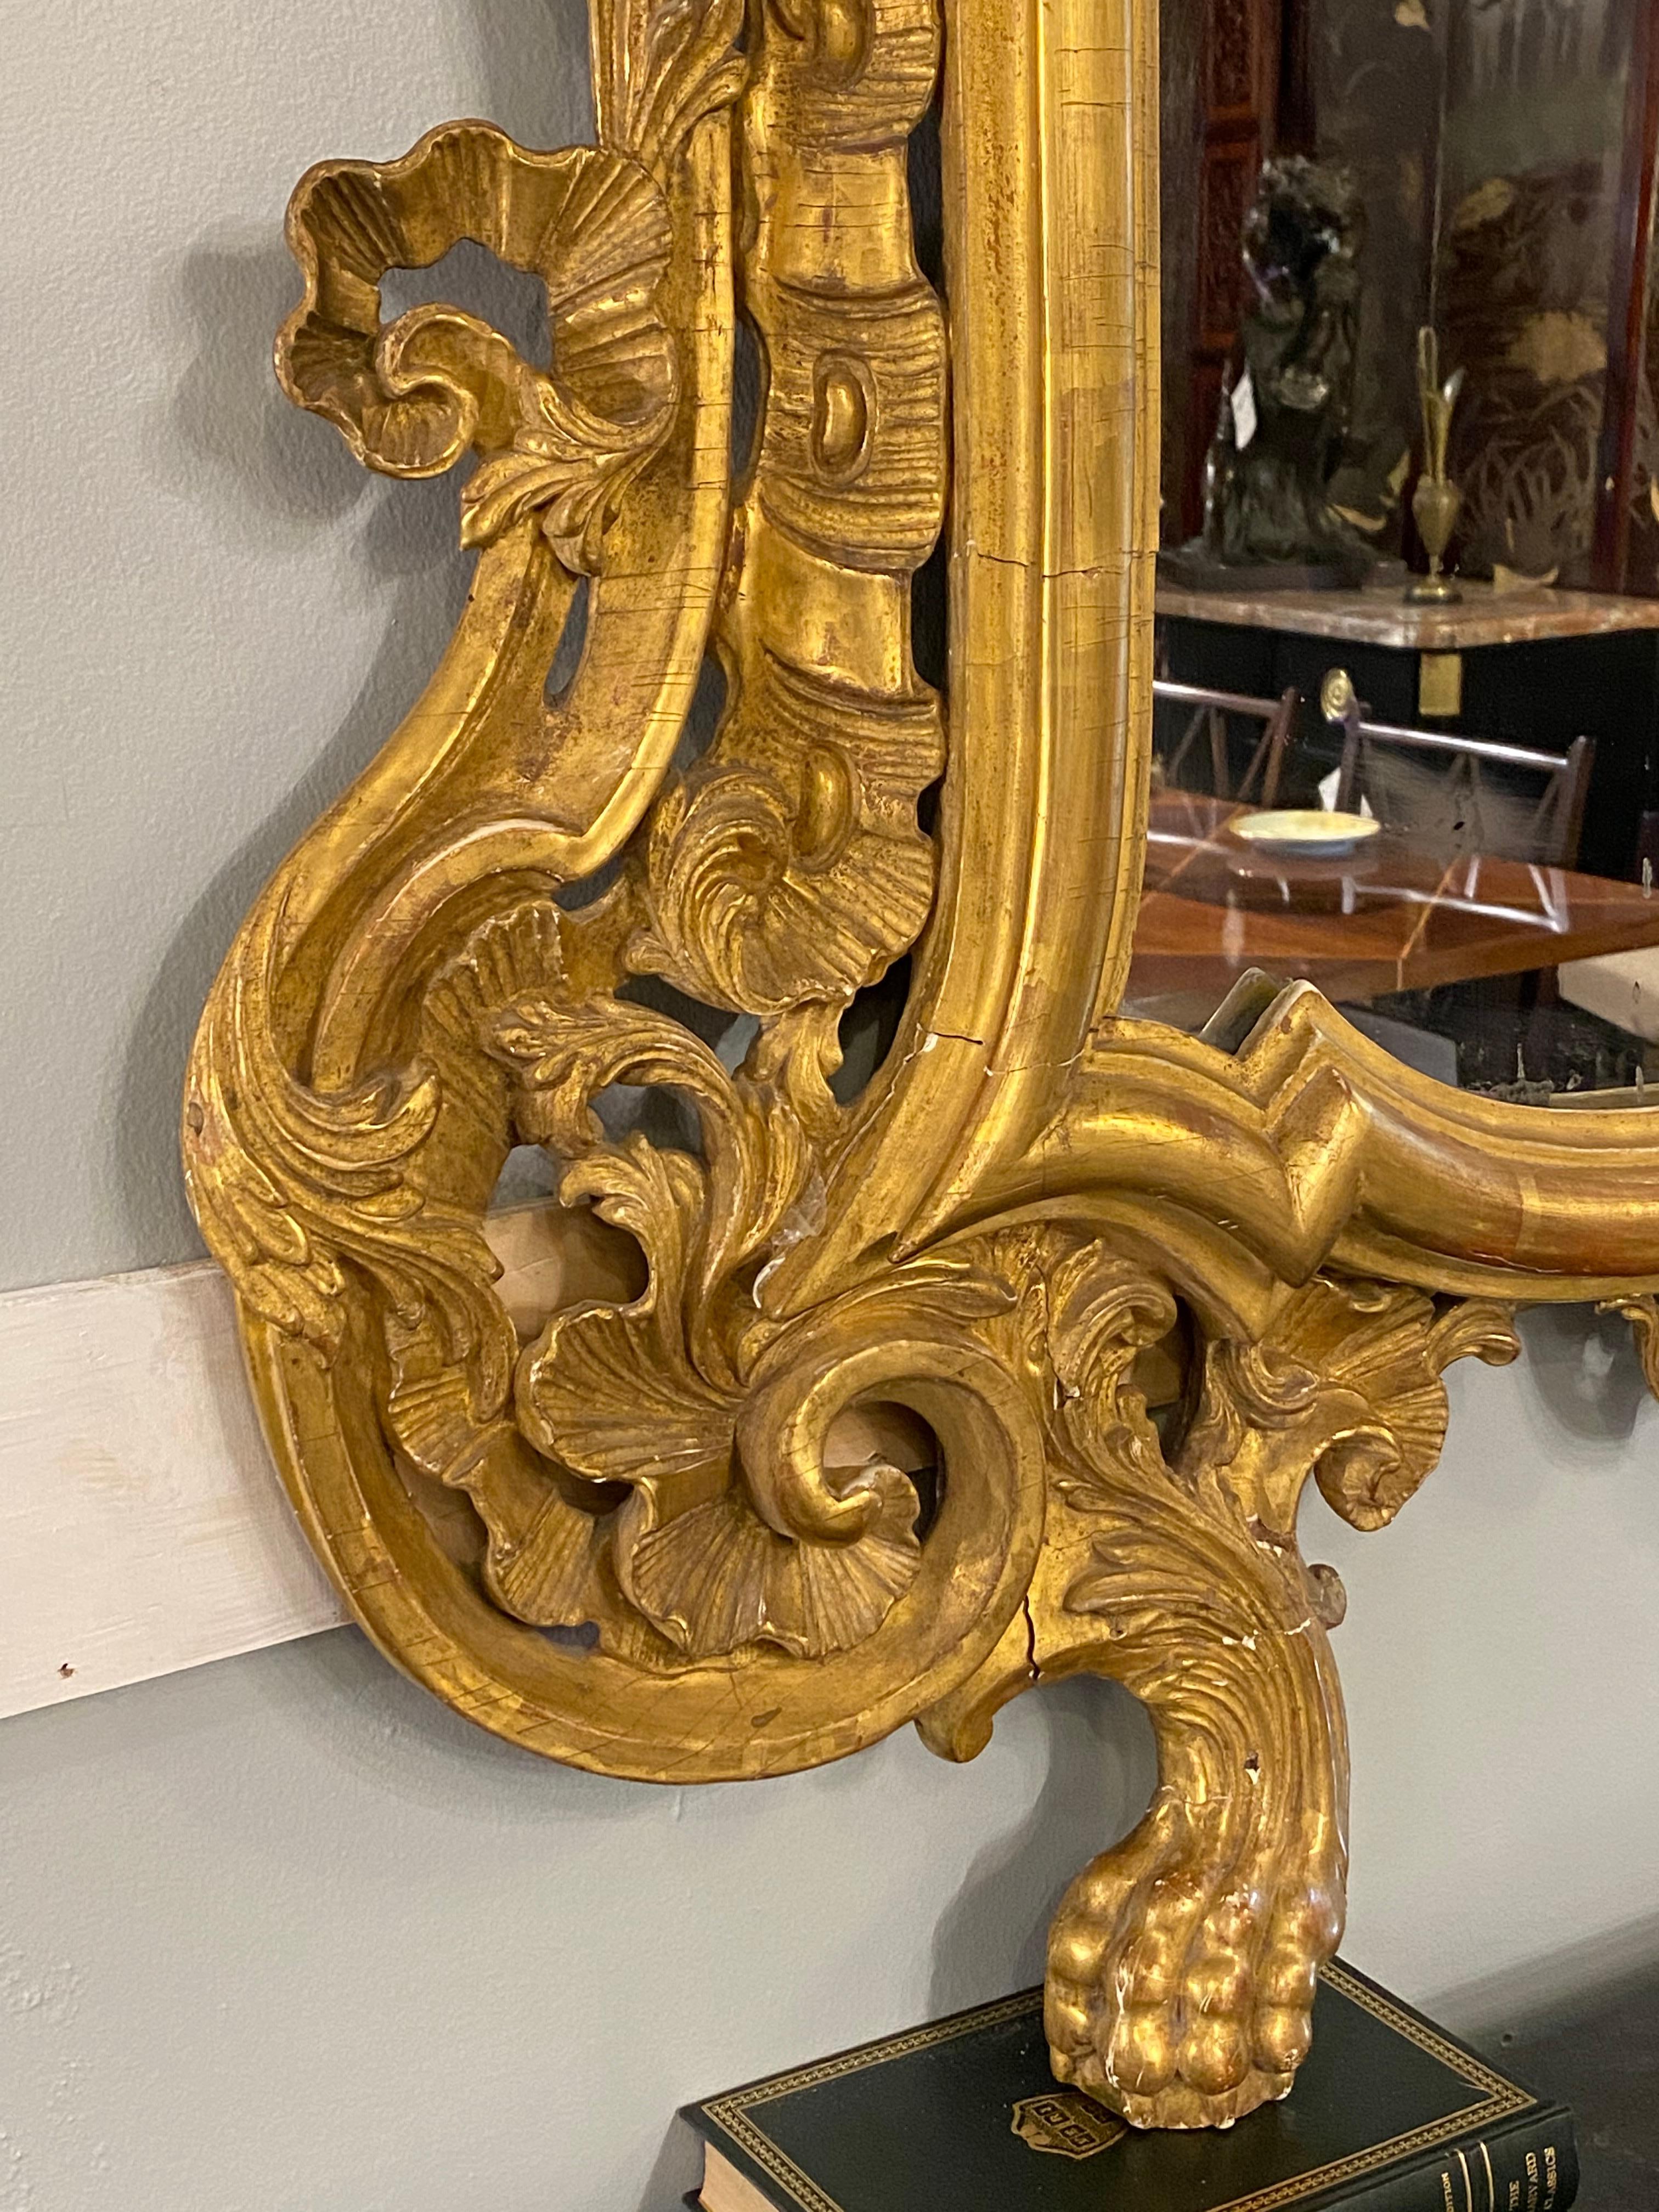 18th Century-Early 19th Century Giltwood Mirror, over the Mantle Wall or Console 2